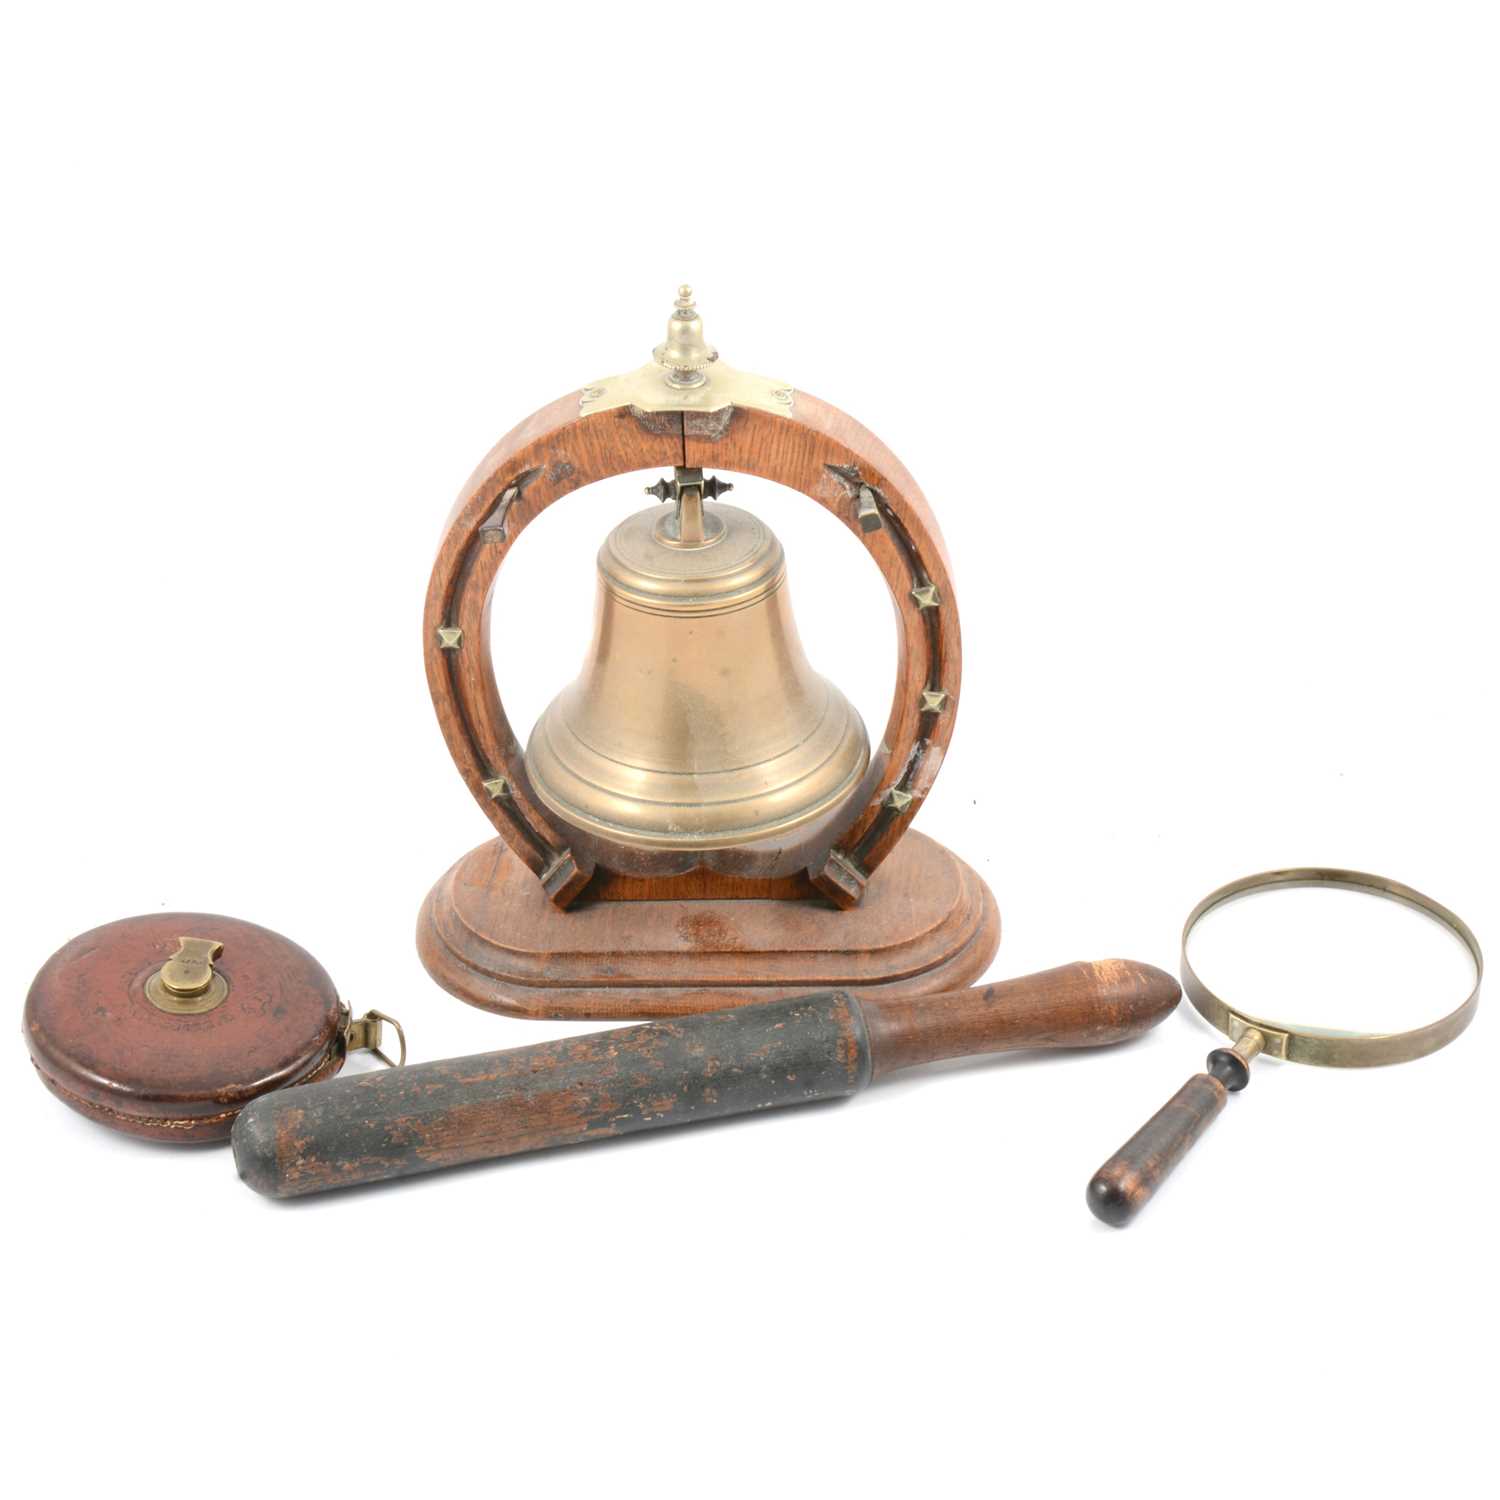 Lot 58 - Bow Street Runners truncheon, table bell, magnifying glass, and a tape measure.